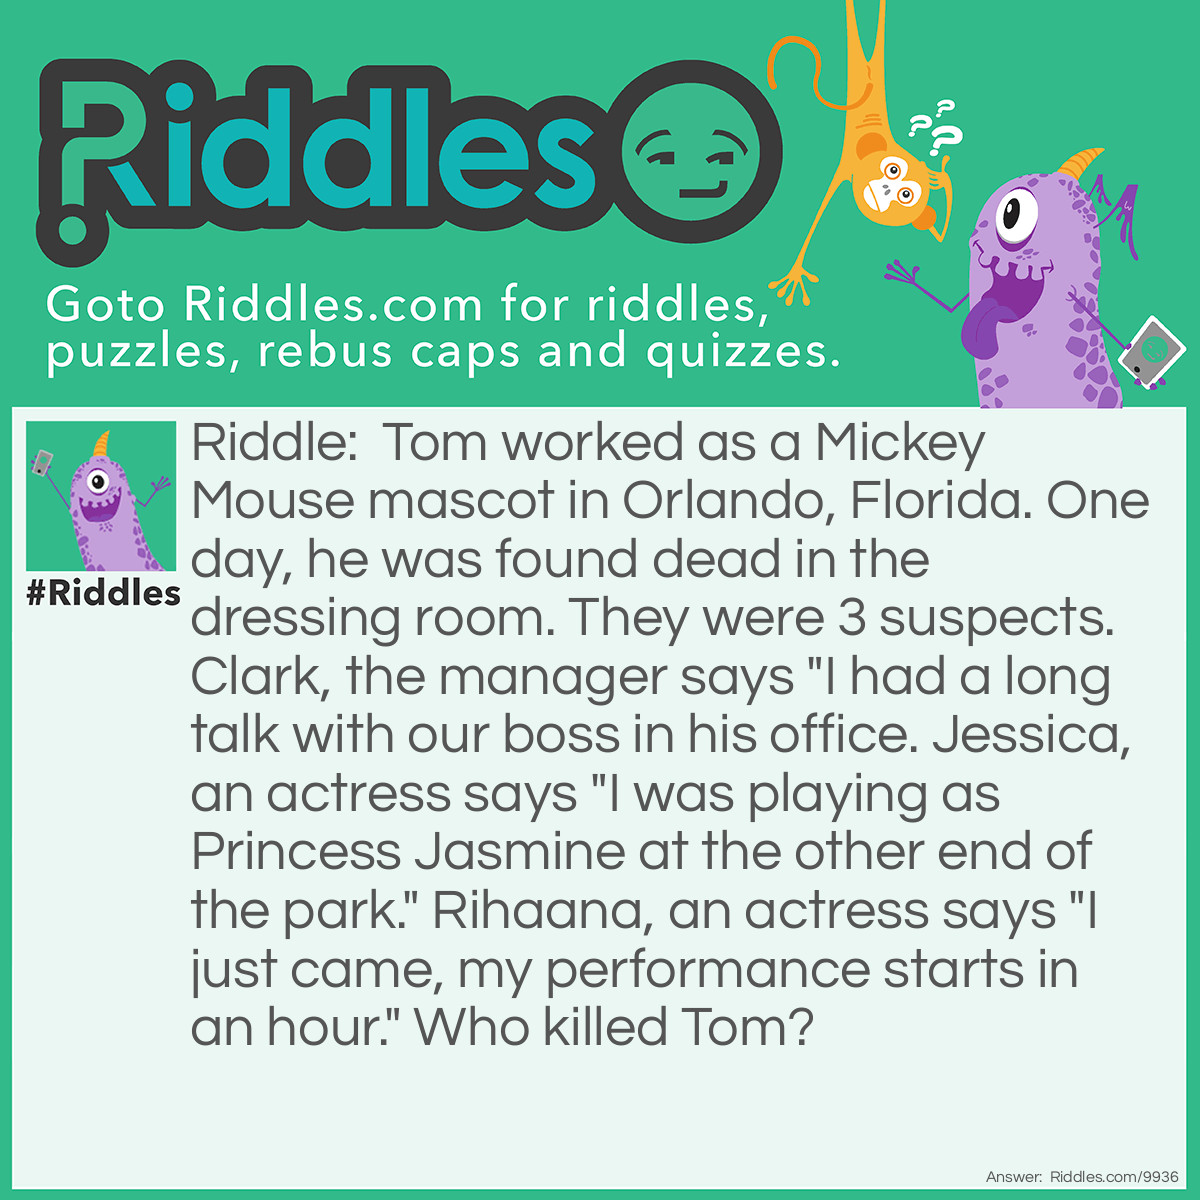 Riddle: Tom worked as a Mickey Mouse mascot in Orlando, Florida. One day, he was found dead in the dressing room. They were 3 suspects. Clark, the manager says "I had a long talk with our boss in his office. Jessica, an actress says "I was playing as Princess Jasmine at the other end of the park." Rihaana, an actress says "I just came, my performance starts in an hour." Who killed Tom? Answer: He was killed by a person with long dark hair. Jessica was wearing the Jasmine costume at the other end at the park. So Jessica was the killer.